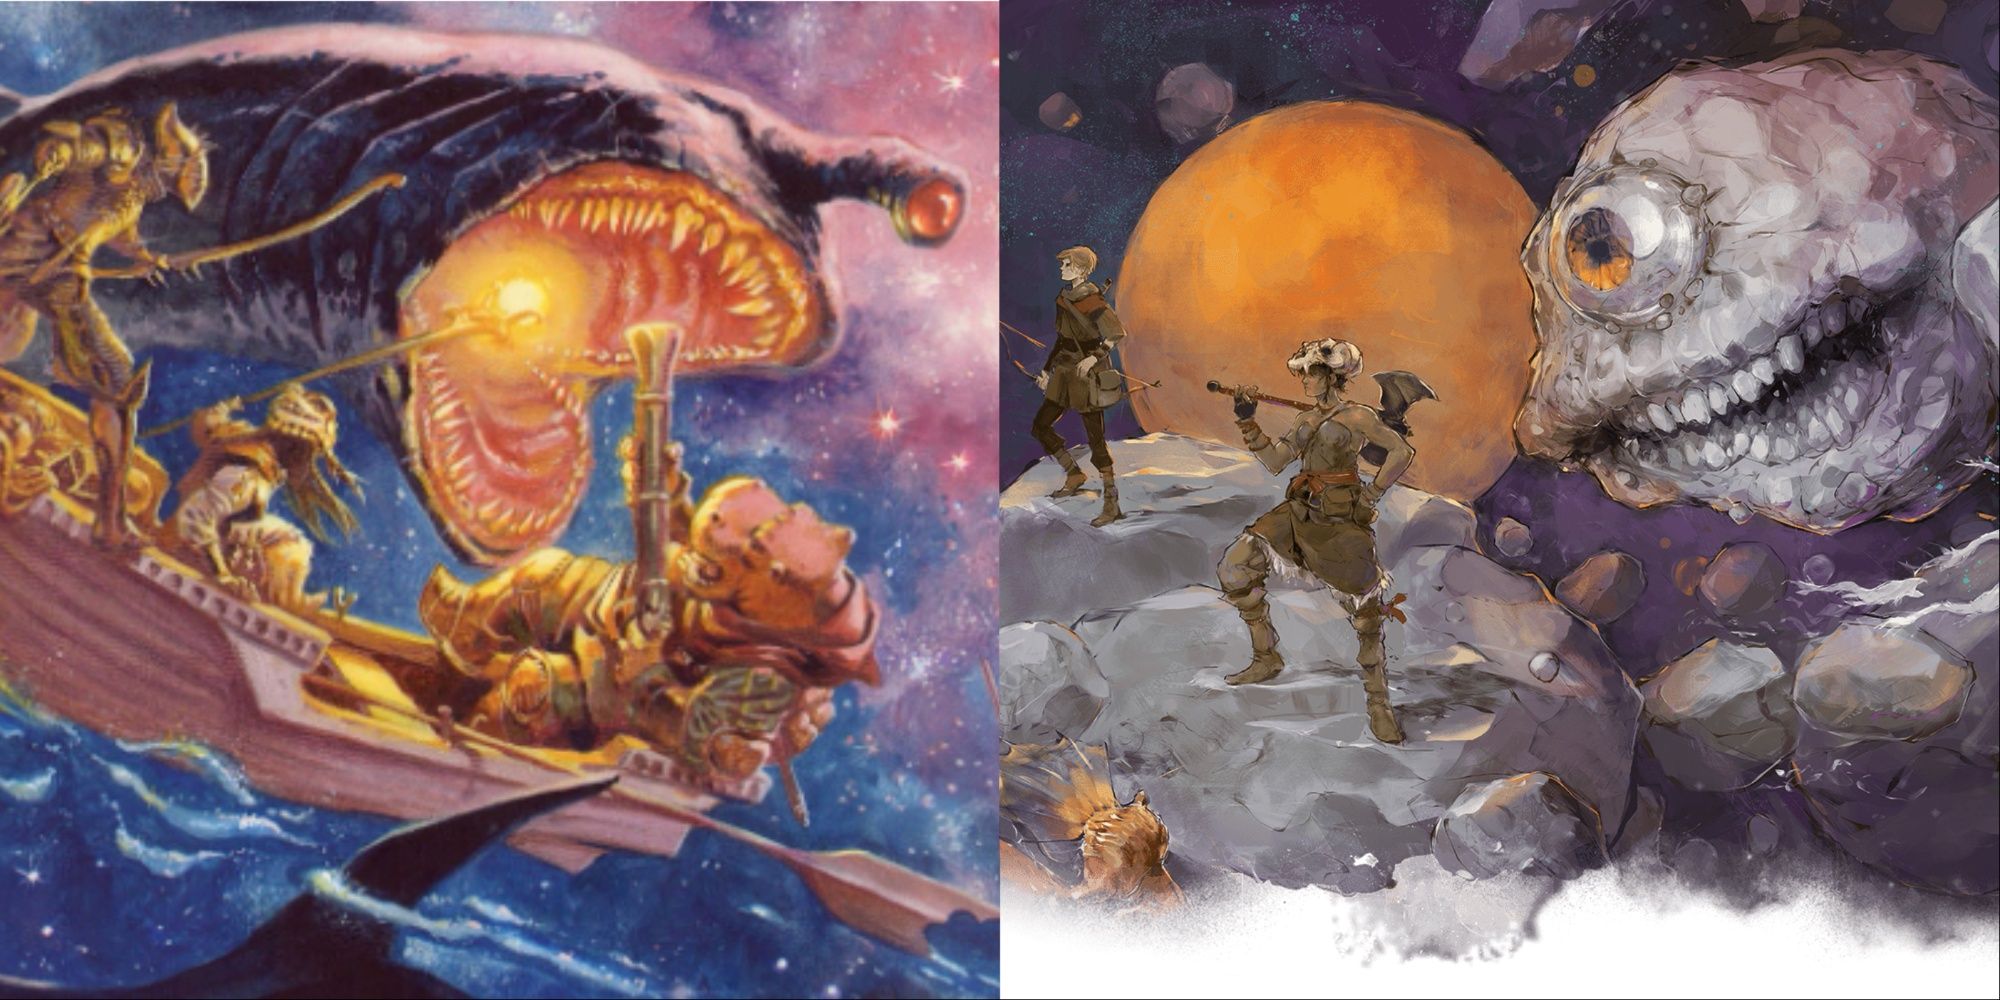 Dungeons And Dragons Giff Firing Musket Into Space Creature On A Ship And Eye Monger Watching Explorers via Wizards of the Coast Spelljammer